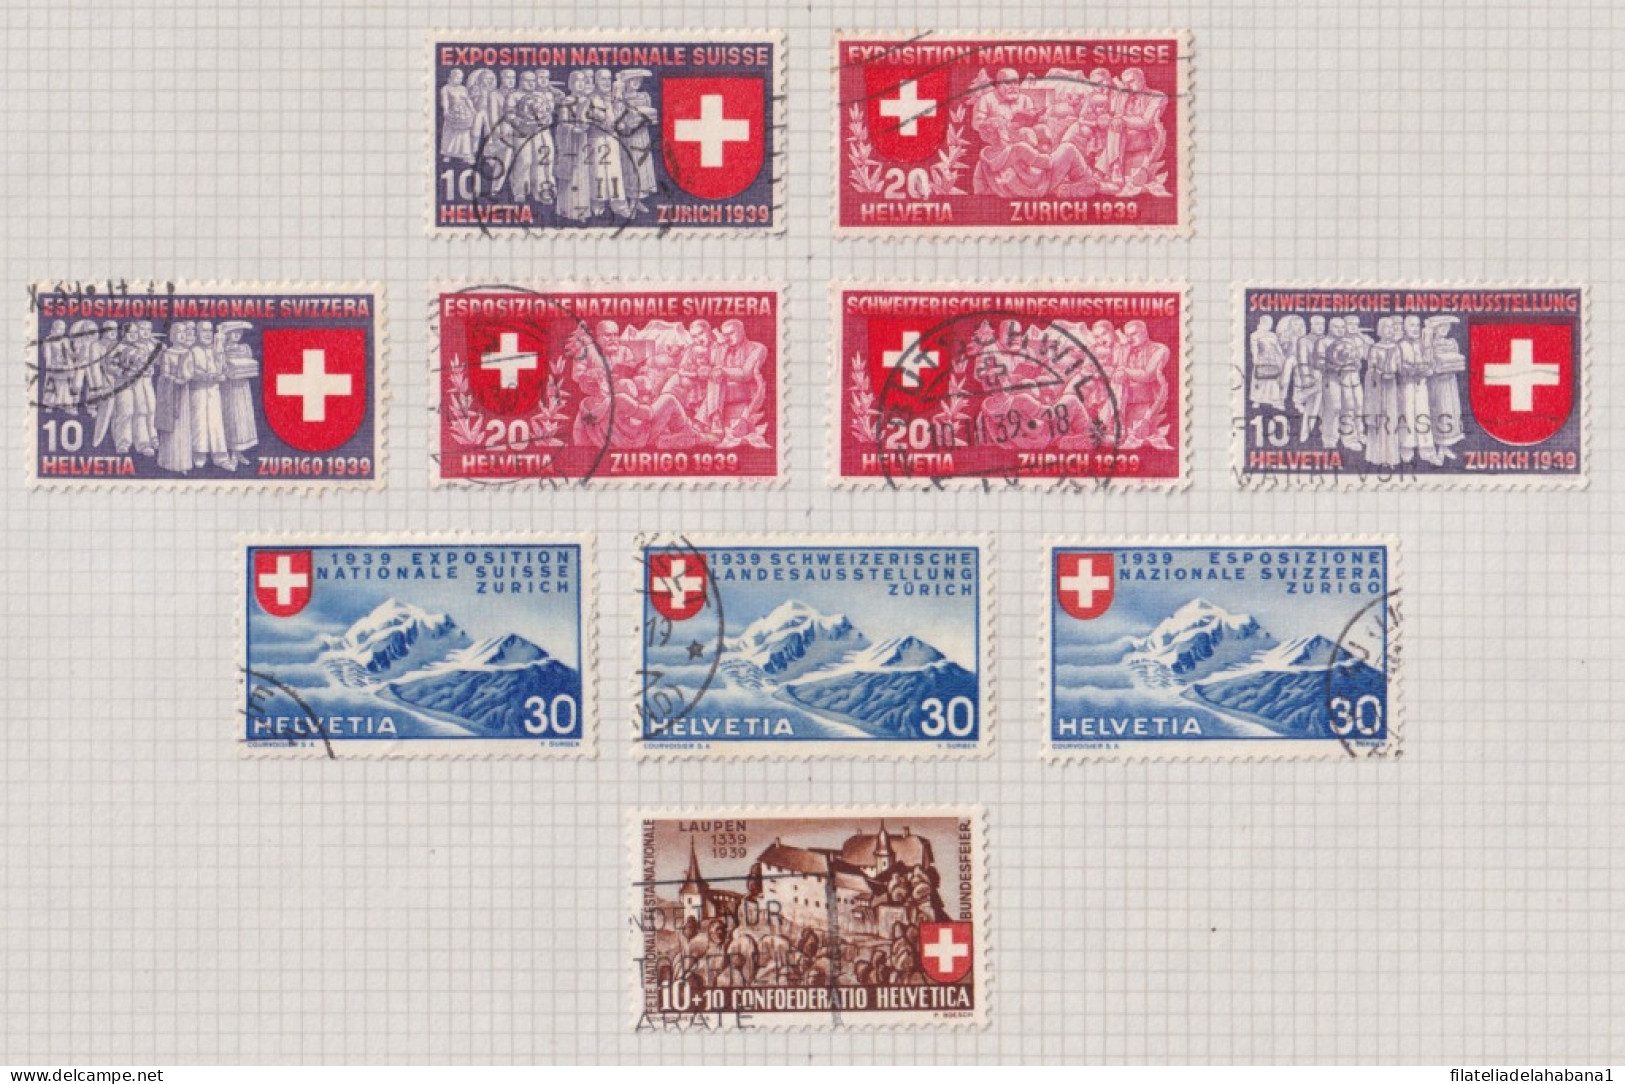 F-EX37589 SWITZERLAND HELVETIA STAMPS COLLECTION LOT USED. 